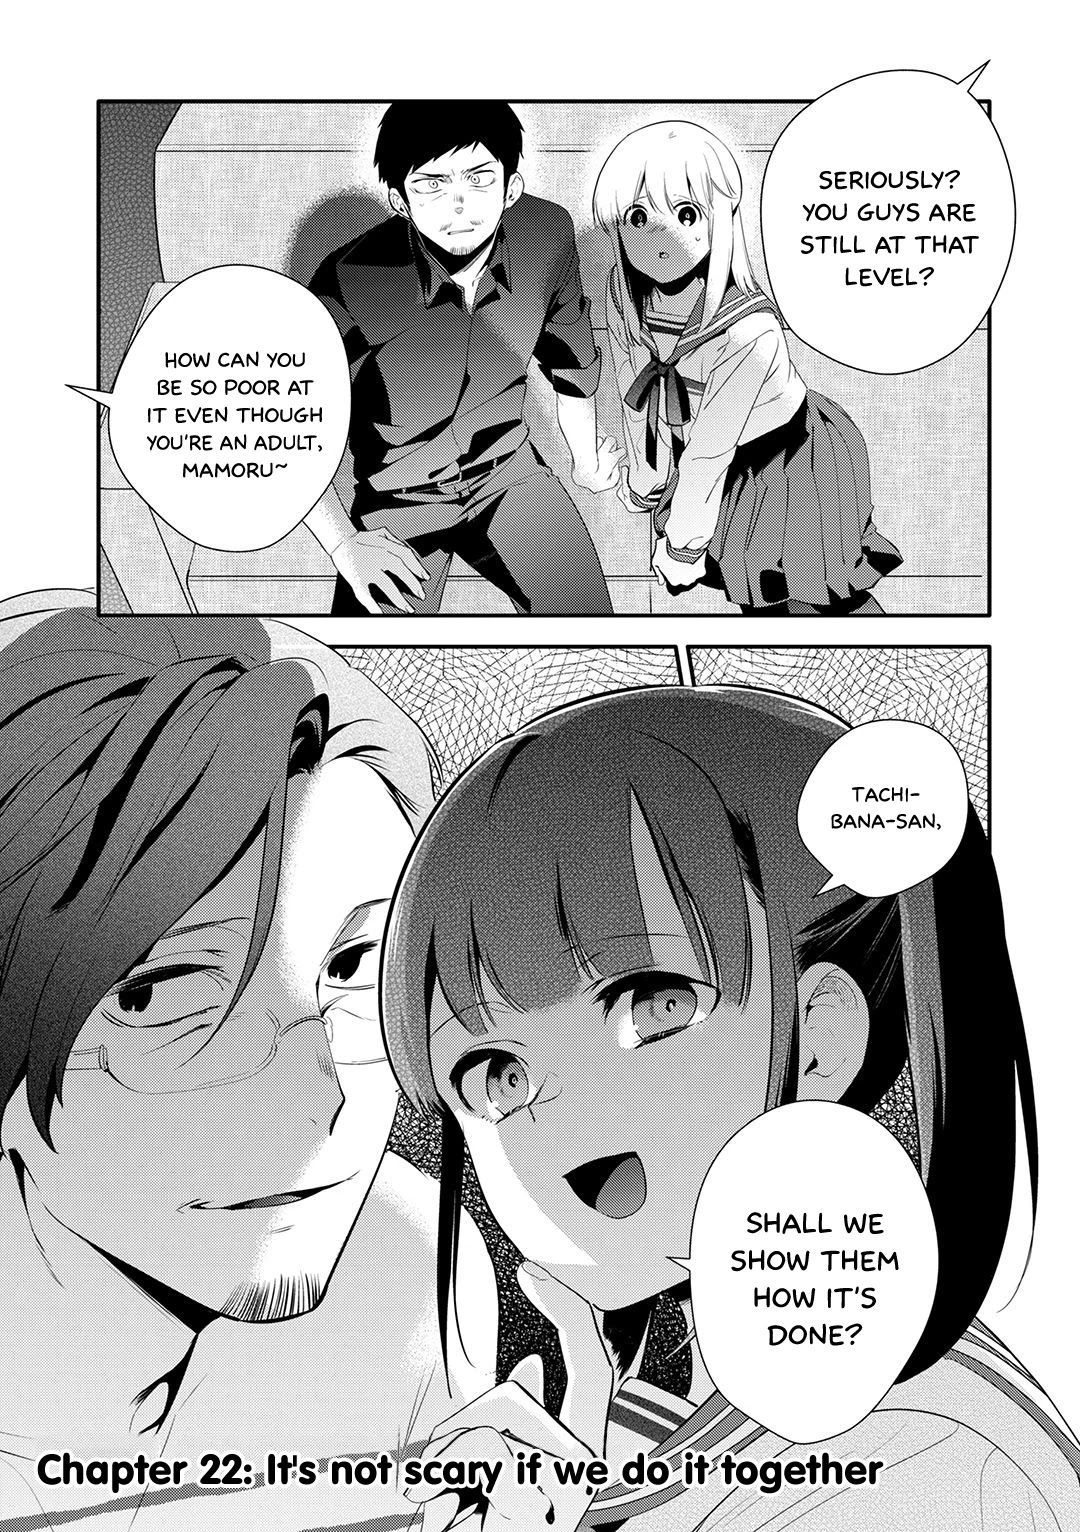 A Story About An Old Man Teaches Bad Things To A School Girl - Page 2